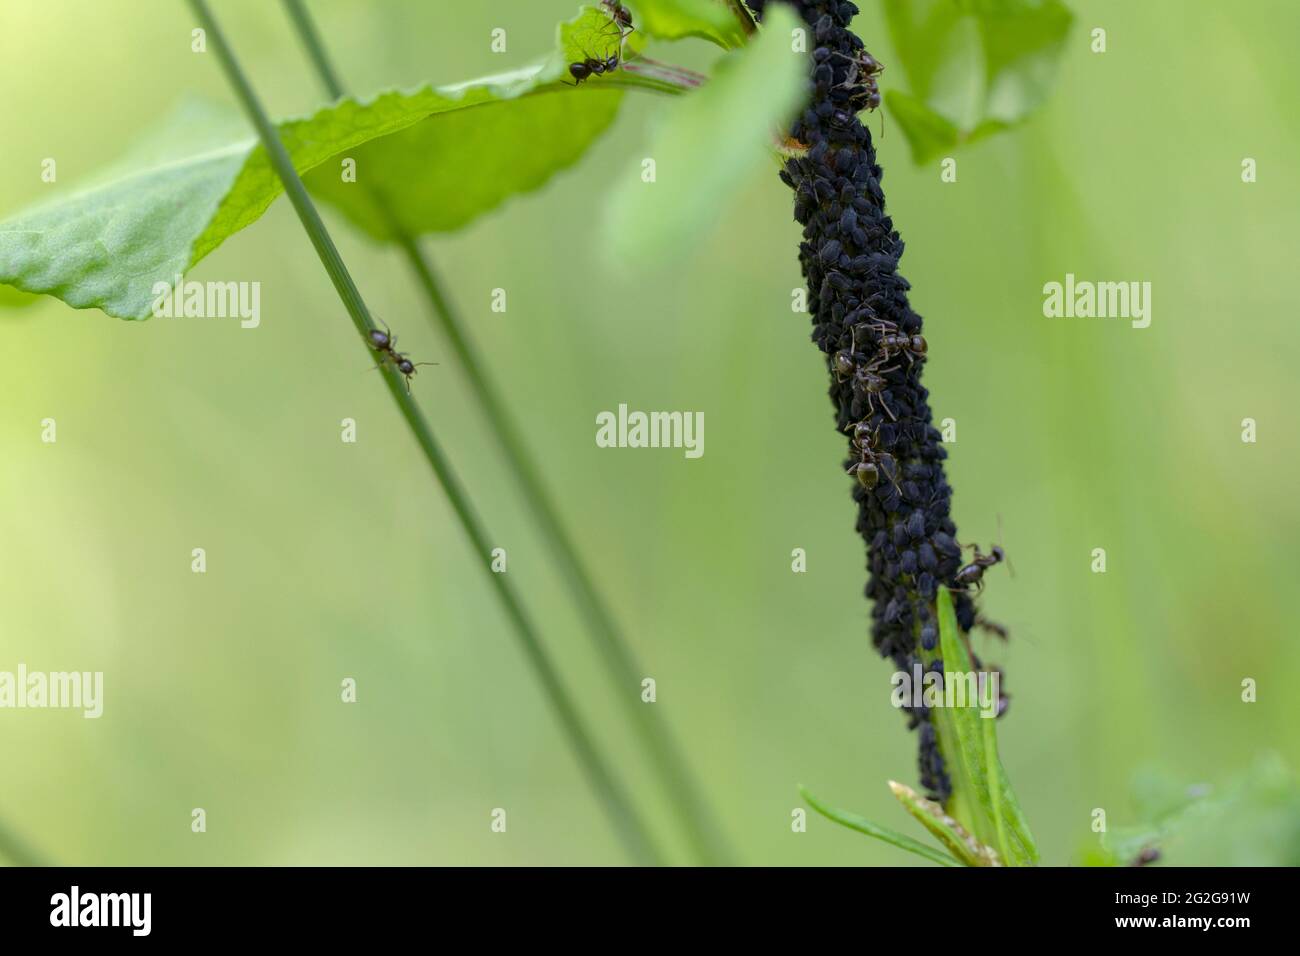 Stem aphid colony raised by Lasius niger ants Stock Photo